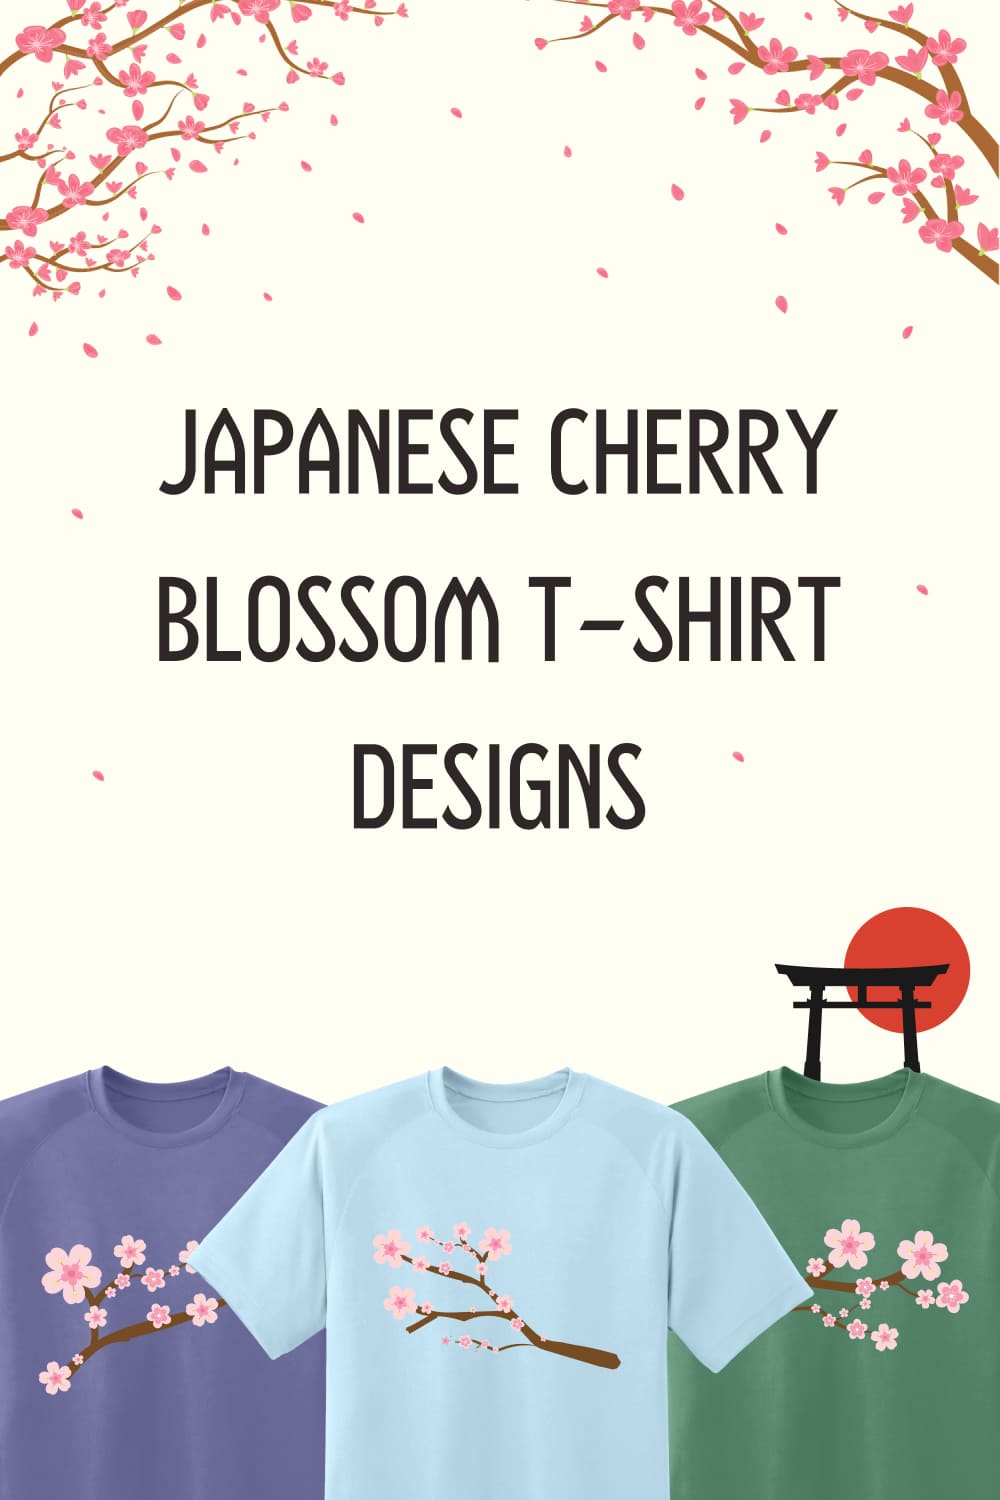 Japanese style of prints on T-shirts.